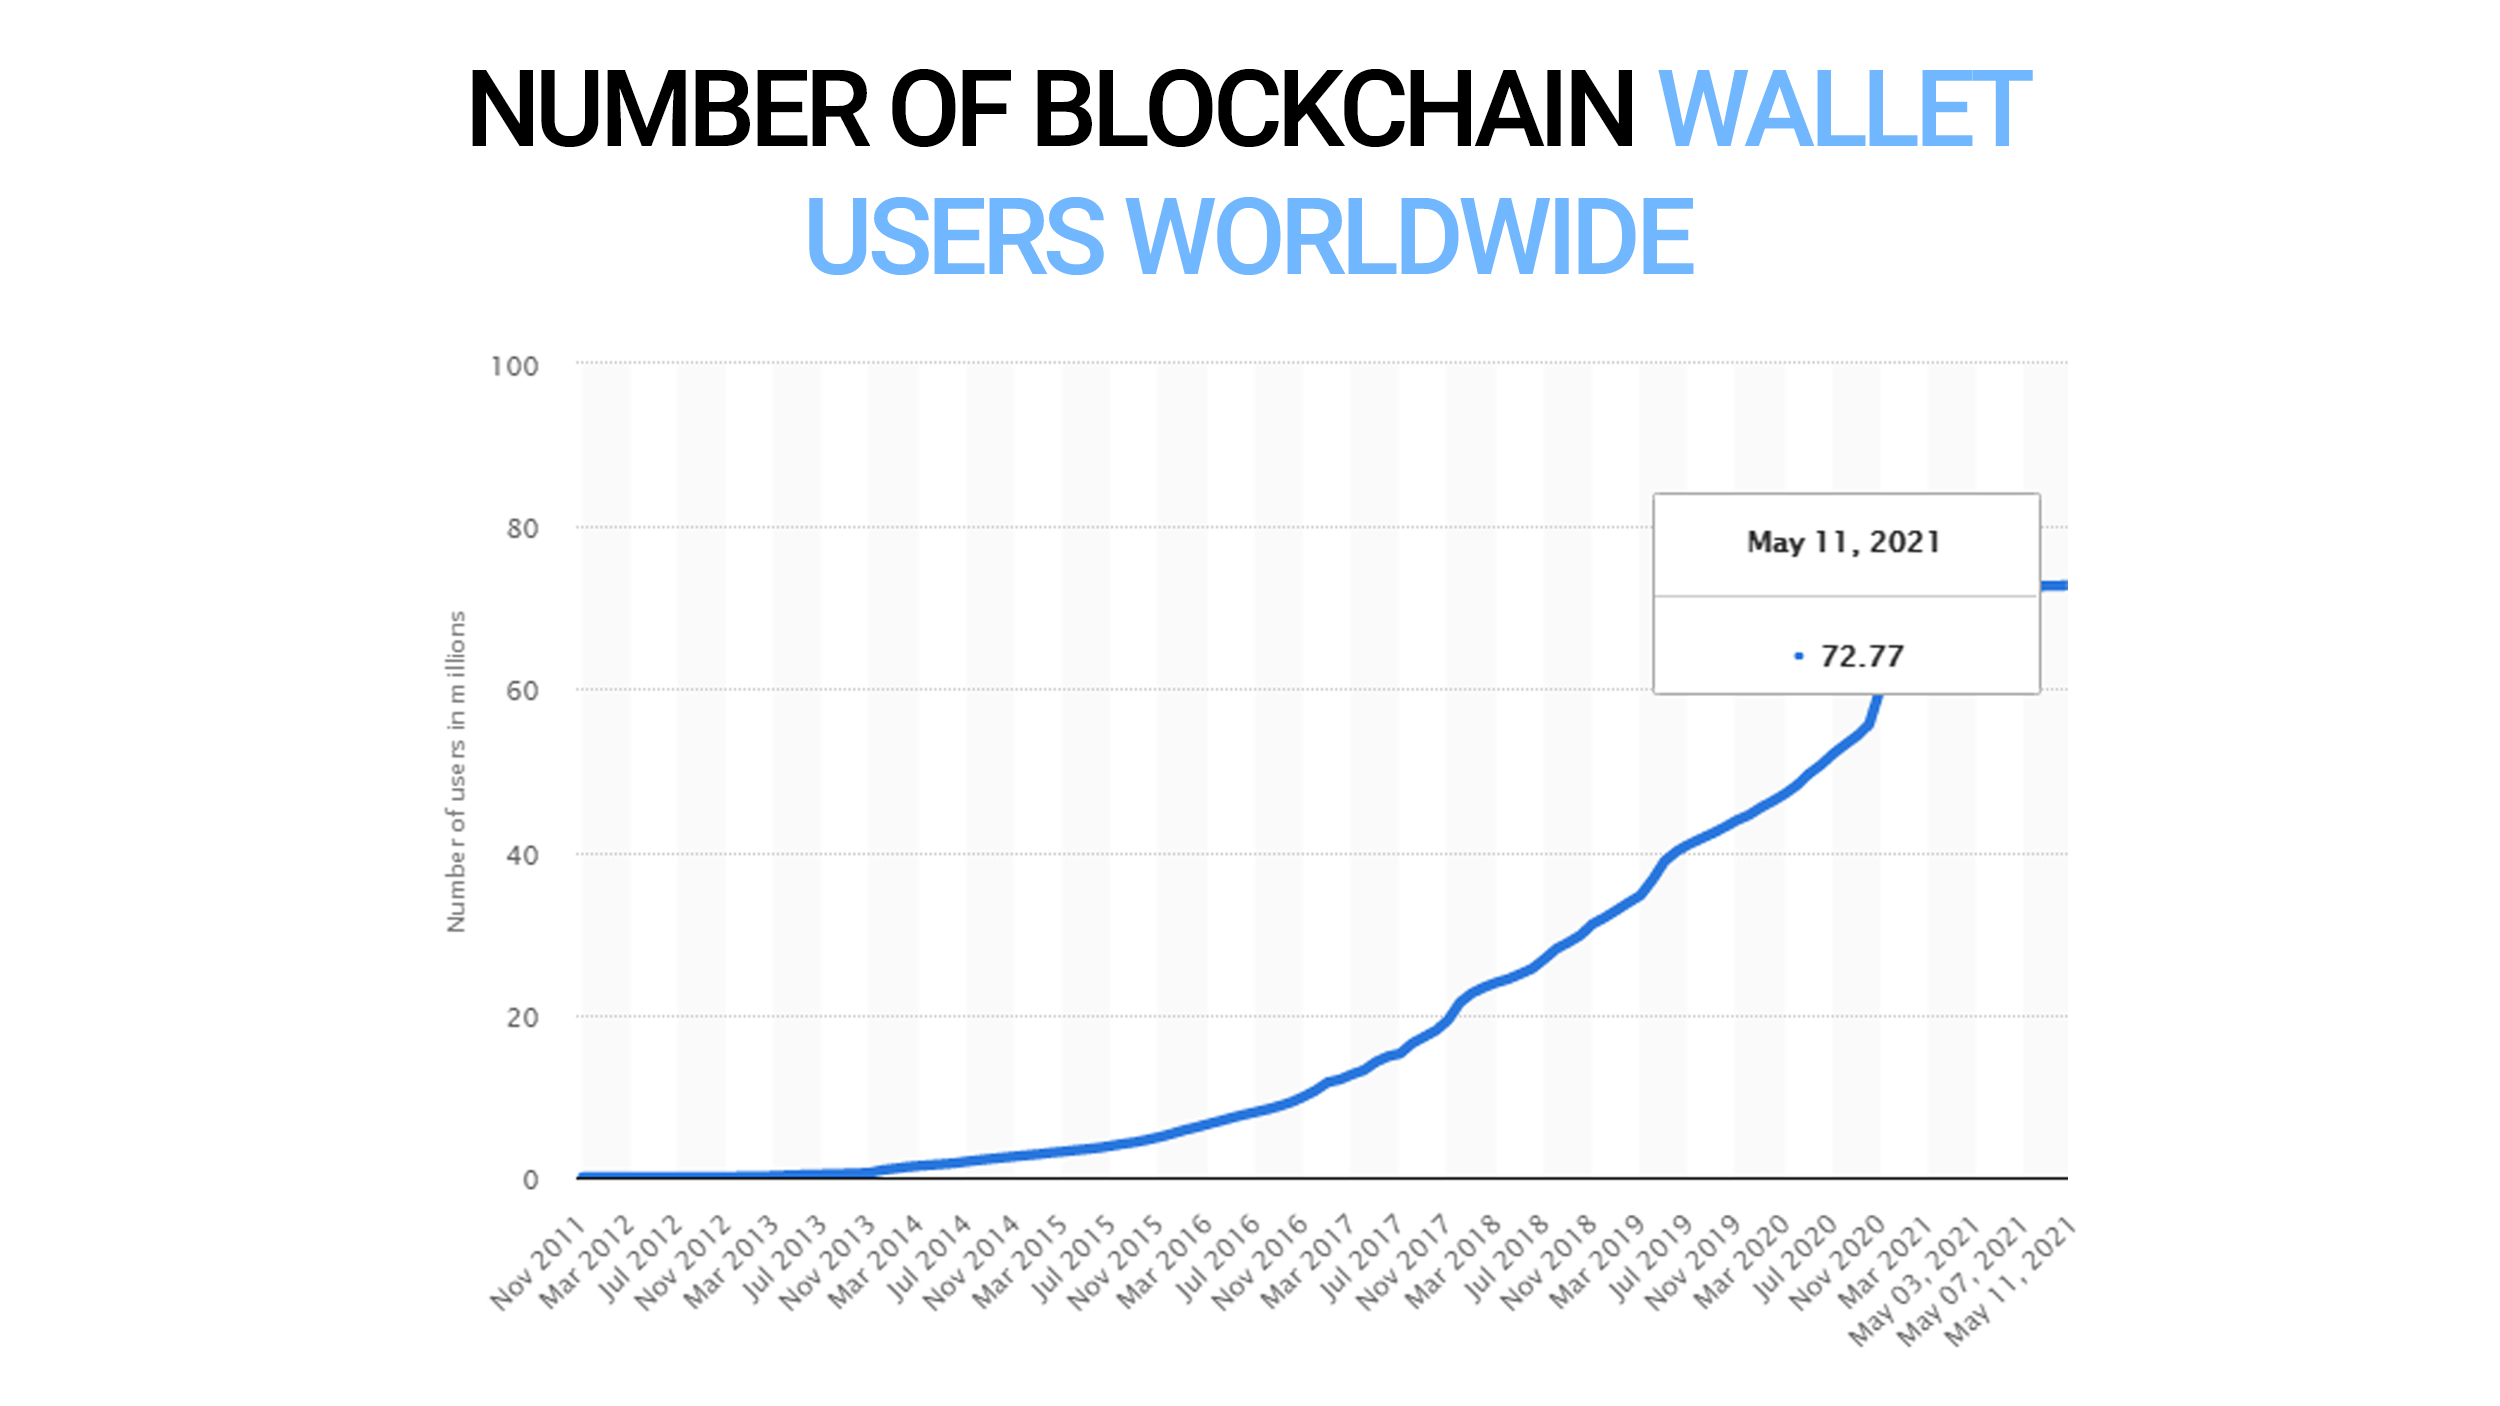 Number of Blockchain wallet users worldwide